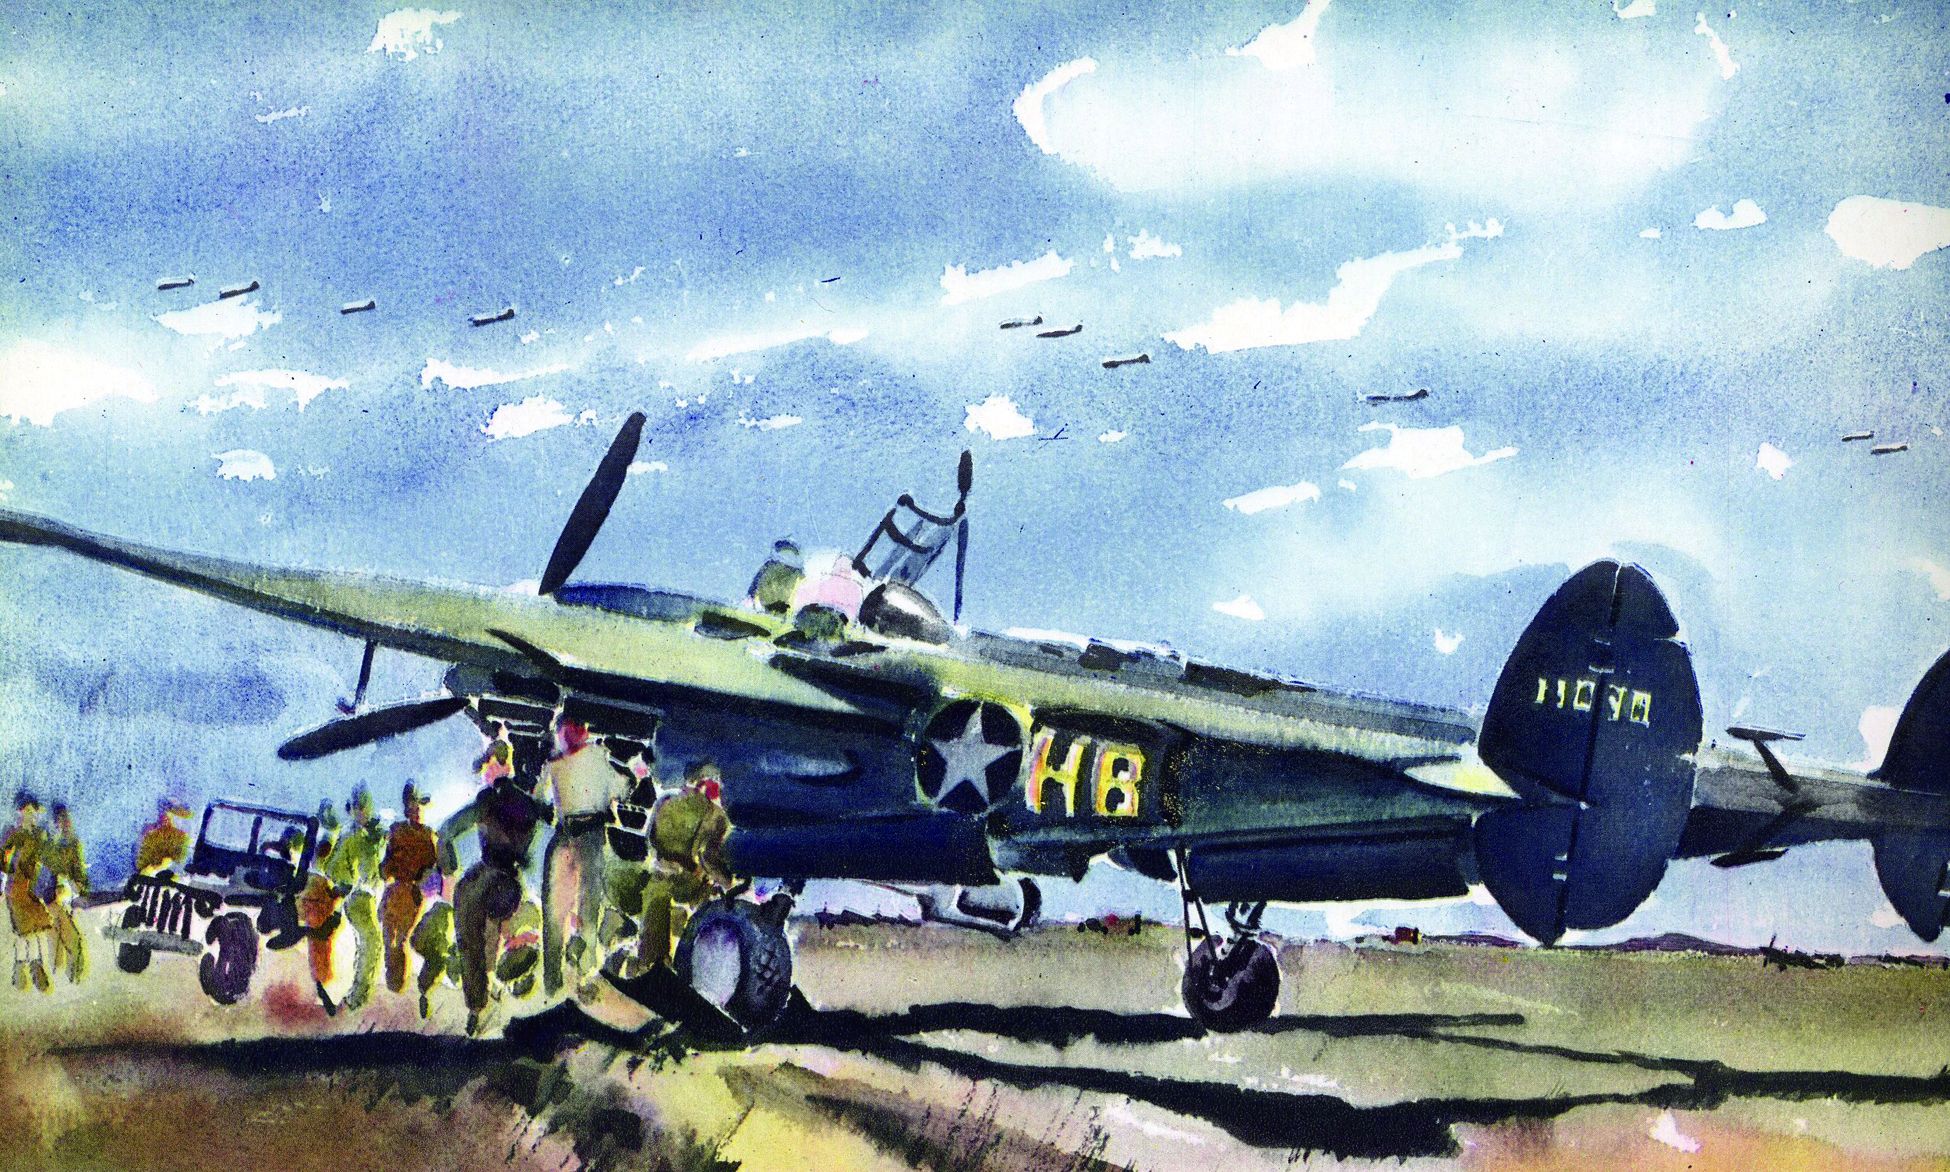 While a flight of P-40s leaves for the island of Pantellaria in the distance, a pilot climbs into his P-38.